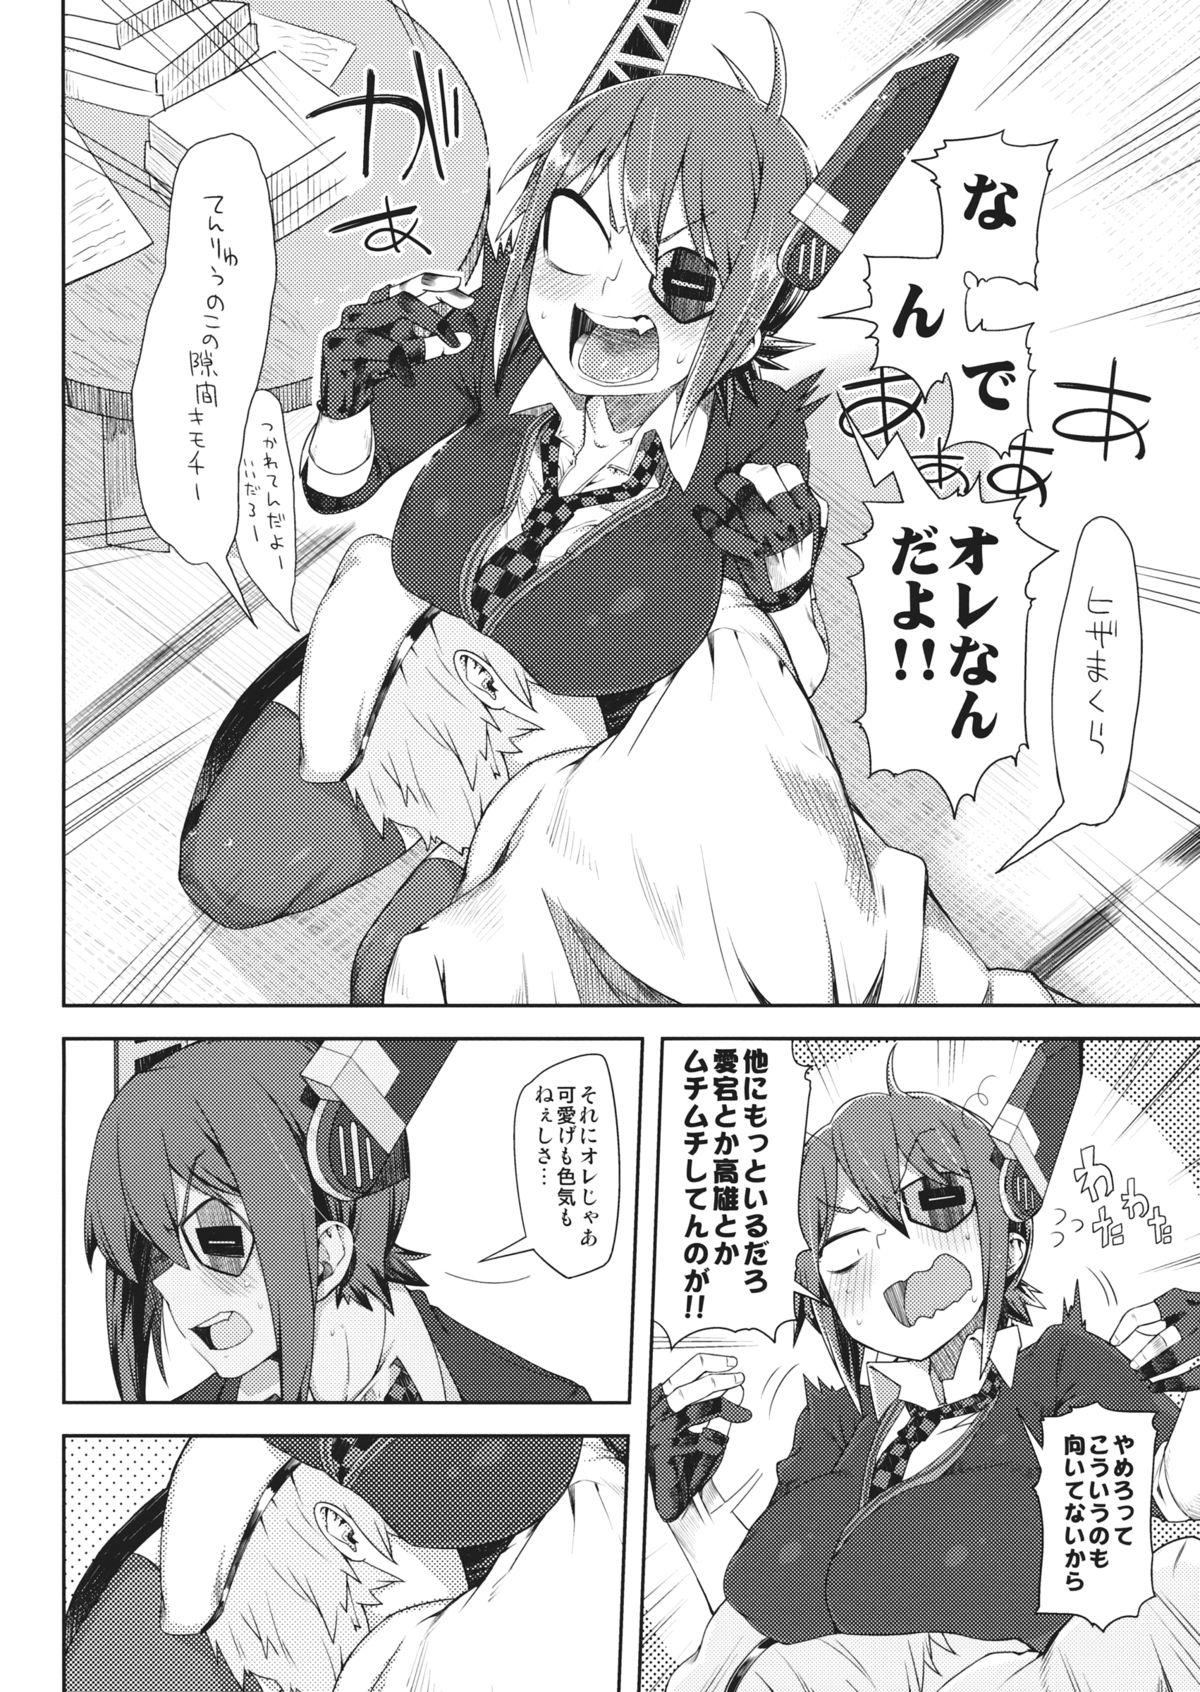 Crossdresser STEH - Kantai collection Made - Page 3